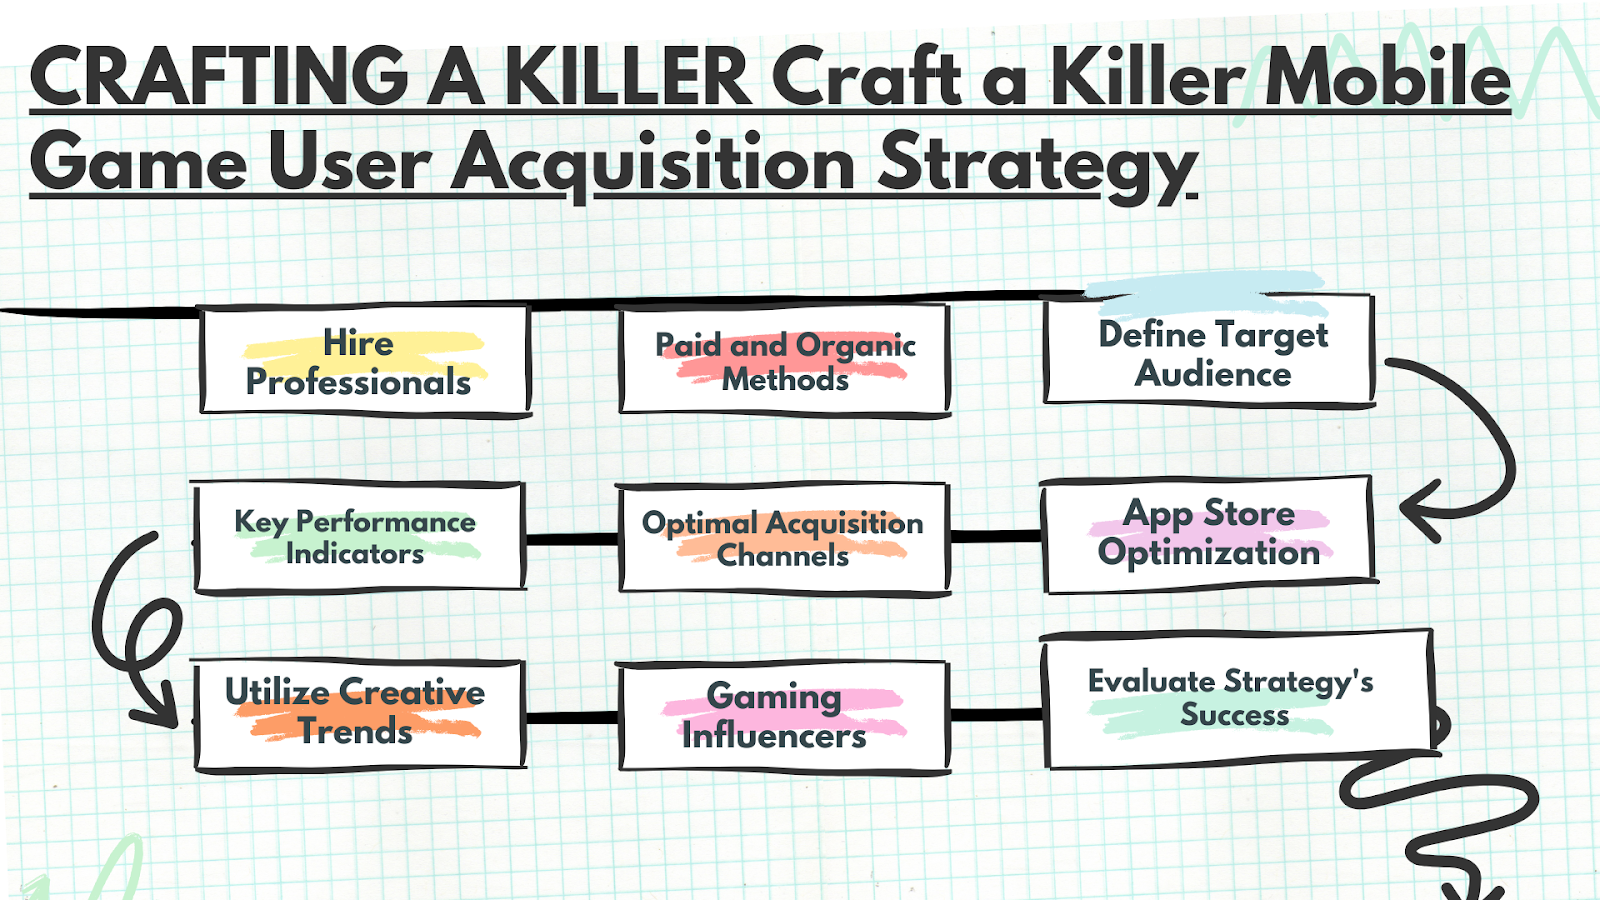 How to Craft a Killer Mobile Game User Acquisition Strategy?